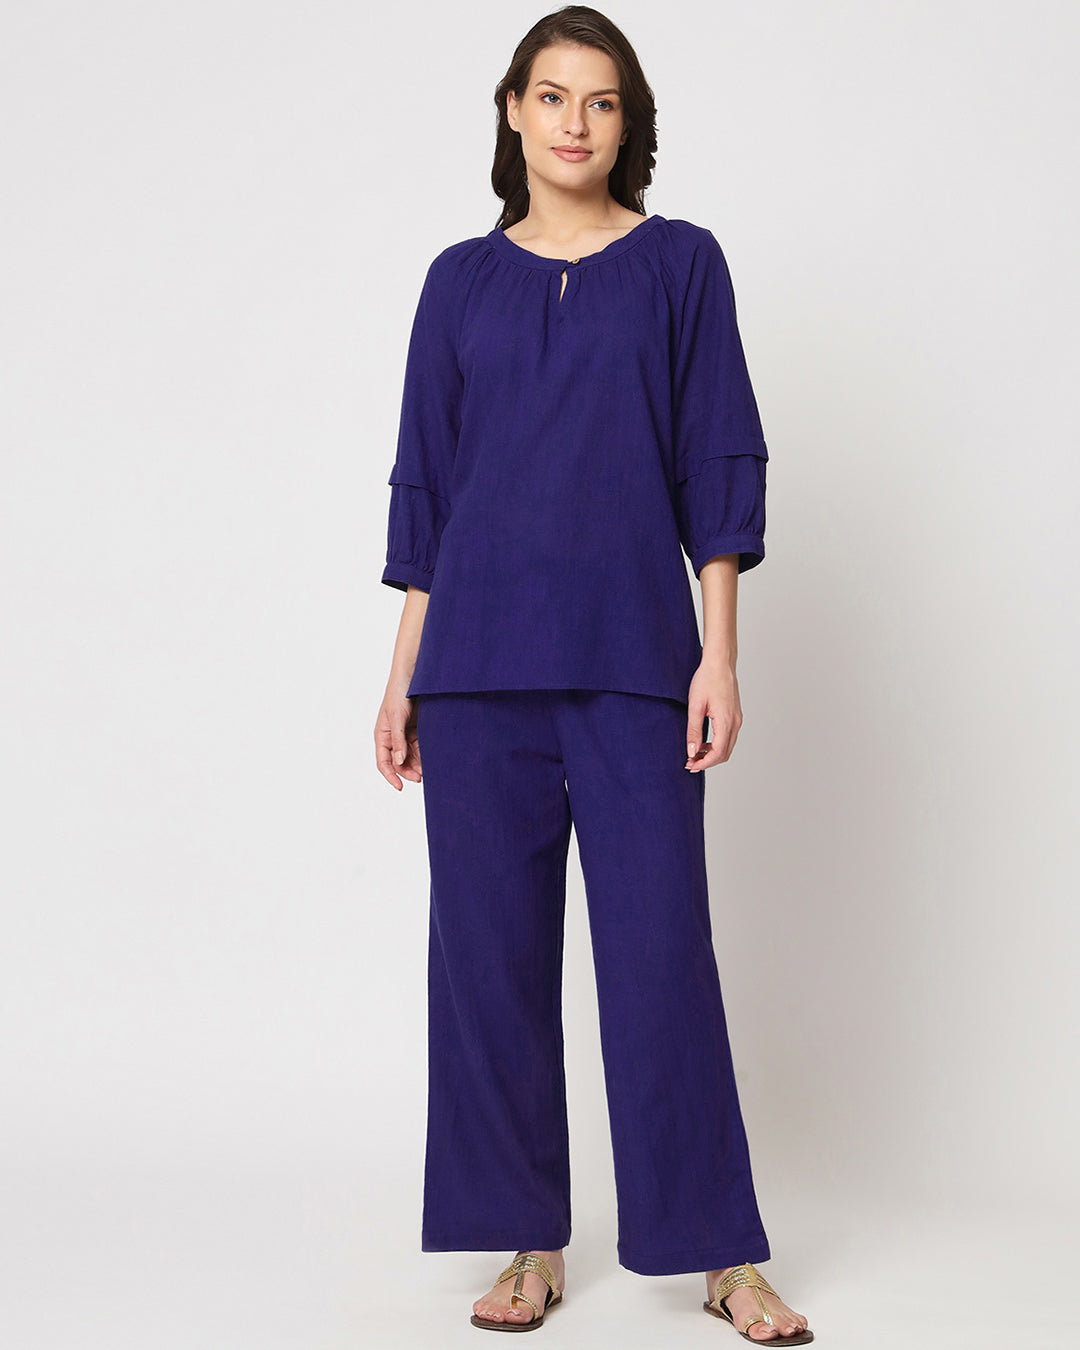 Aurora Purple Button Neck Solid Top (Without Bottoms)